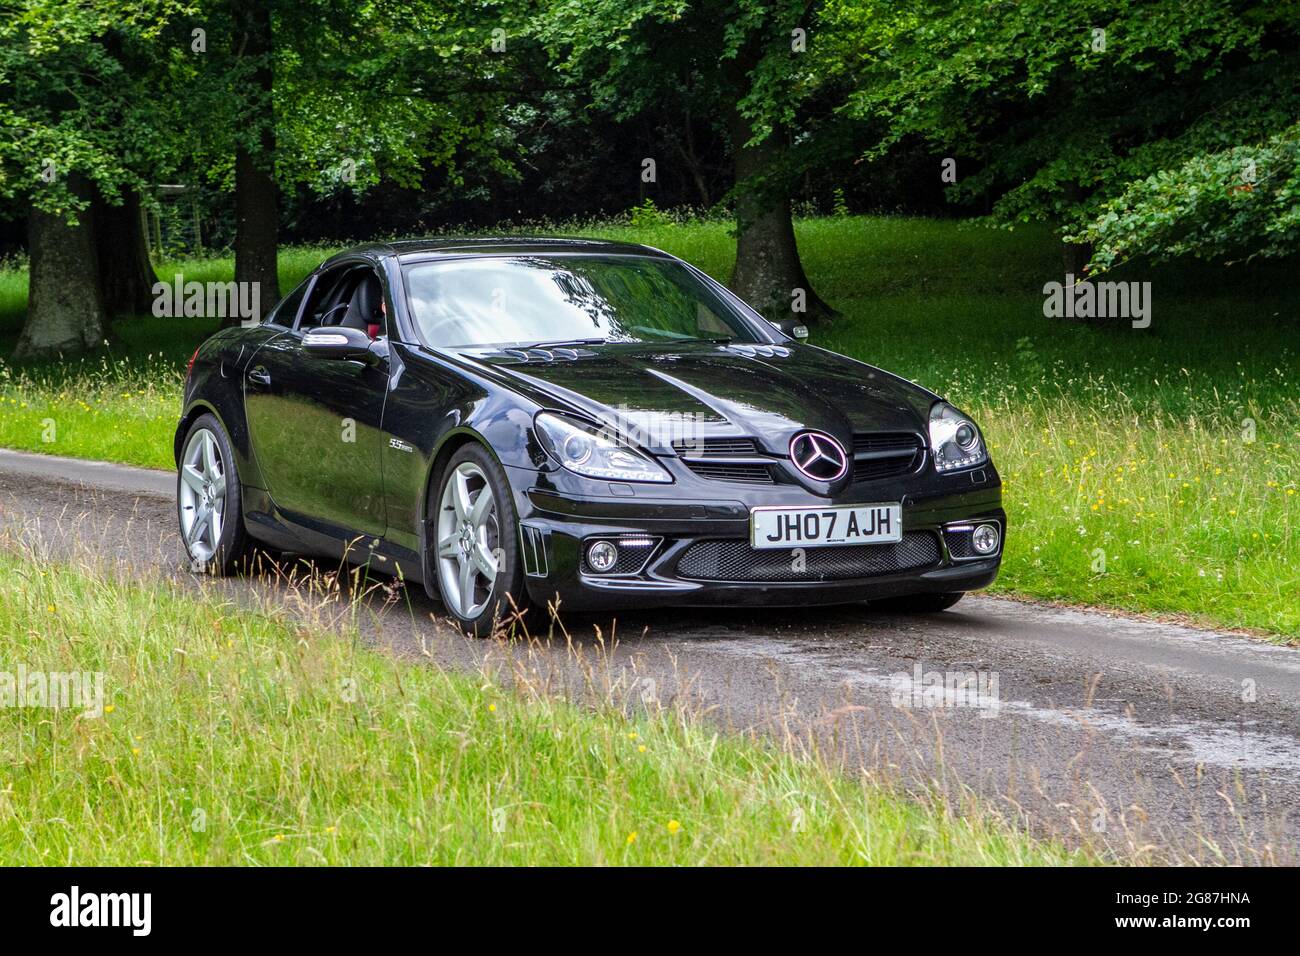 A Mercedes Slk 55 Amg Auto Black Car Roadster at ‘The Cars the Star Show” in Holker Hall & Gardens, Grange-over-Sands, UK Stock Photo